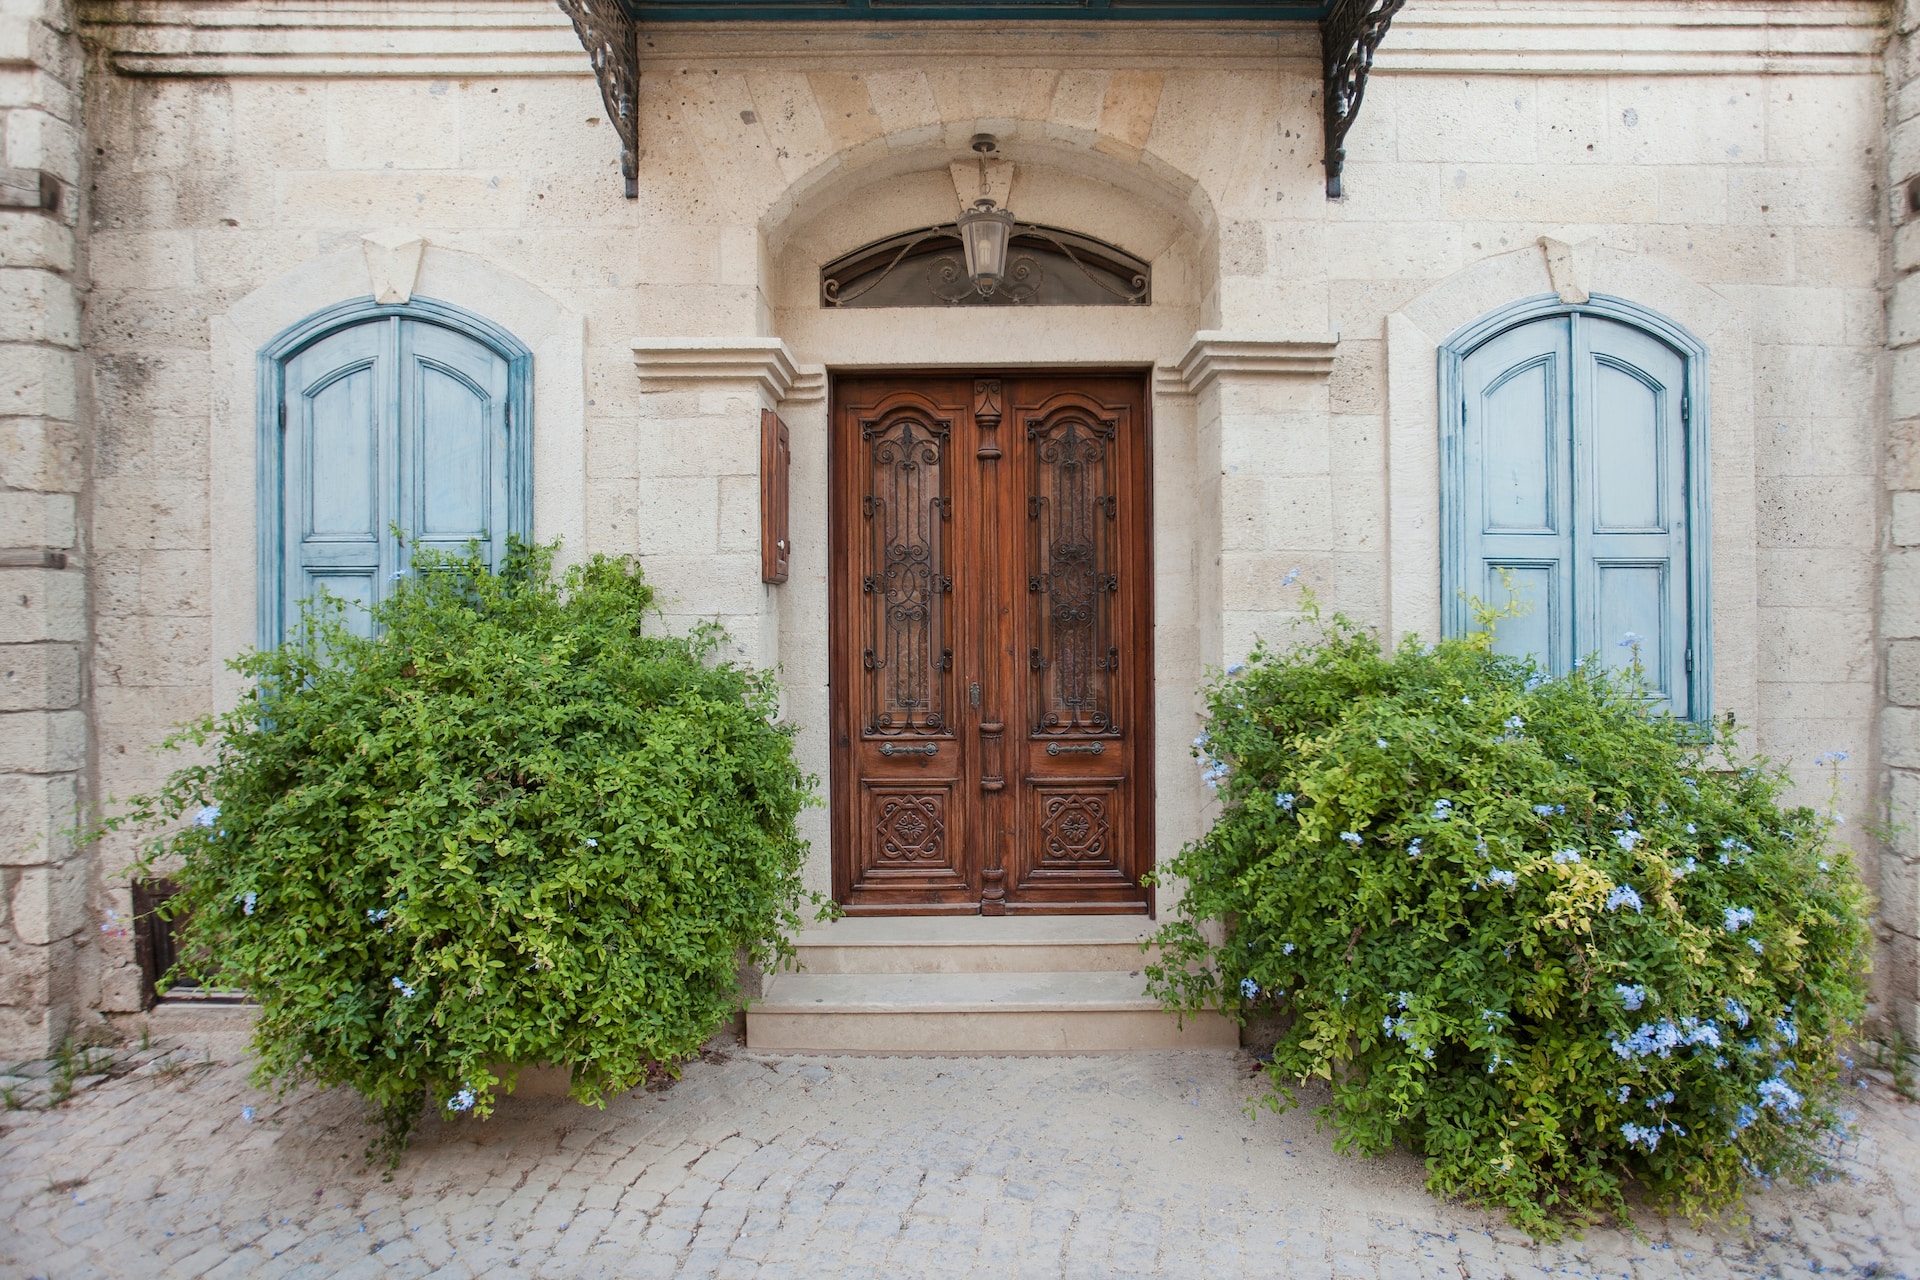 brown carved door, blu shutters, white house. Image from Unsplash